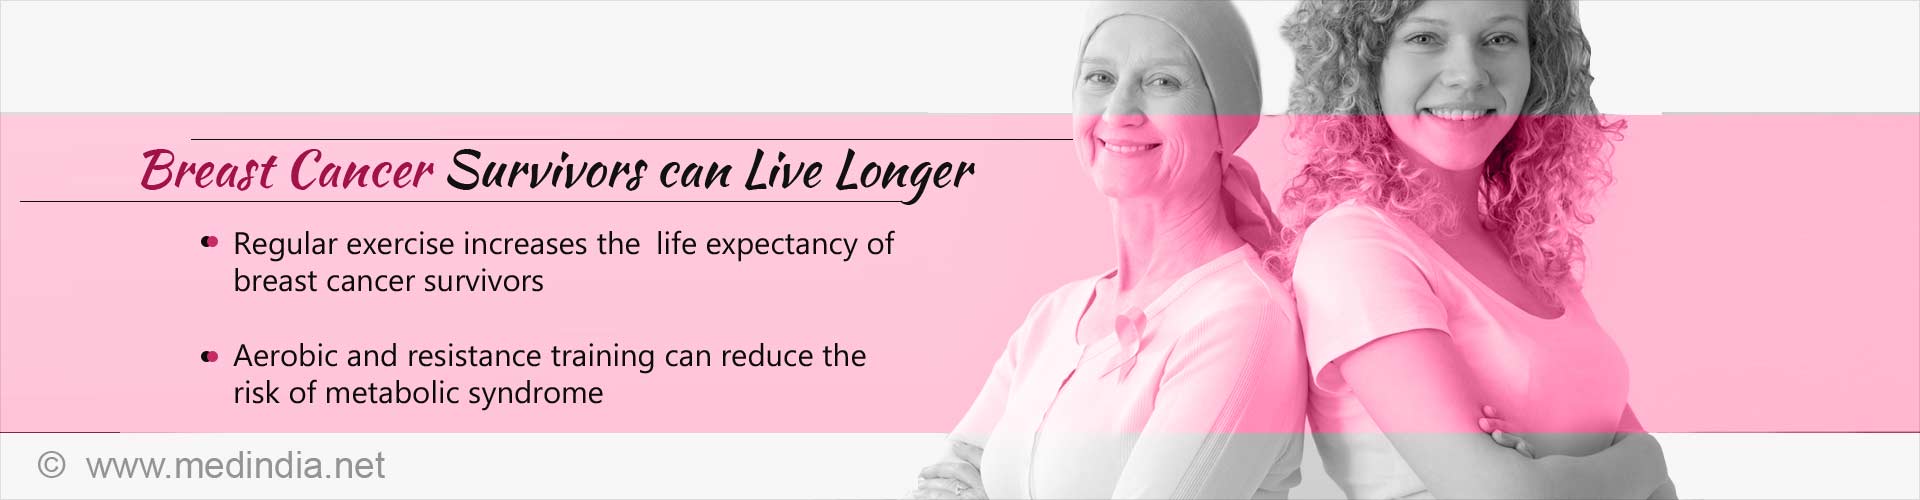 breast cancer survivors can live longer
- regular exercise increases the life expectancy of breast cancer survivors
- aerobic and resistance training can reduce the risk of metabolic syndrome